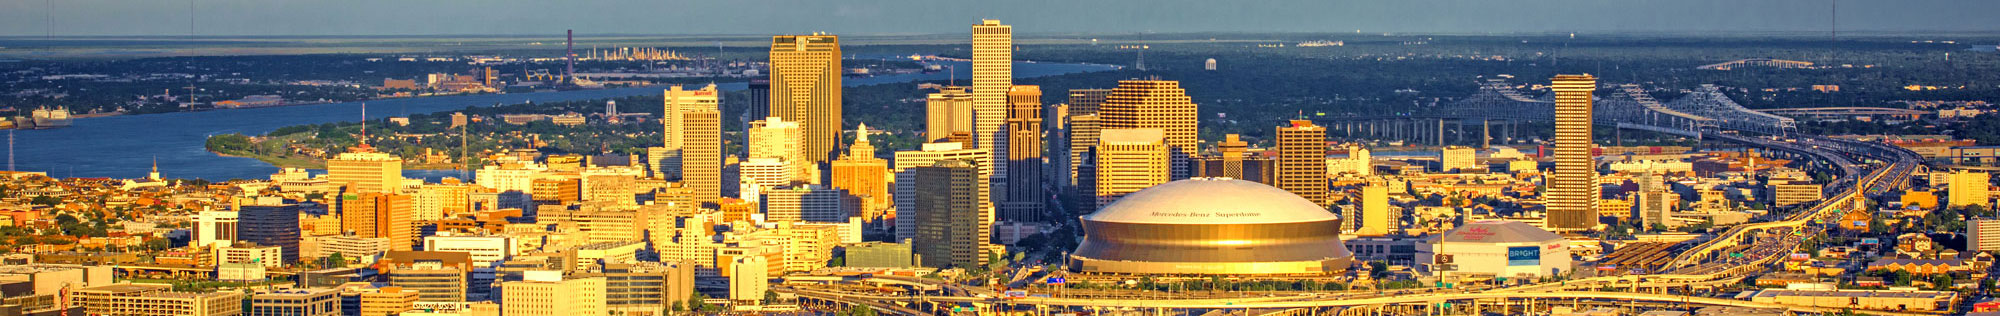 Arial picture of New Orleans skyline